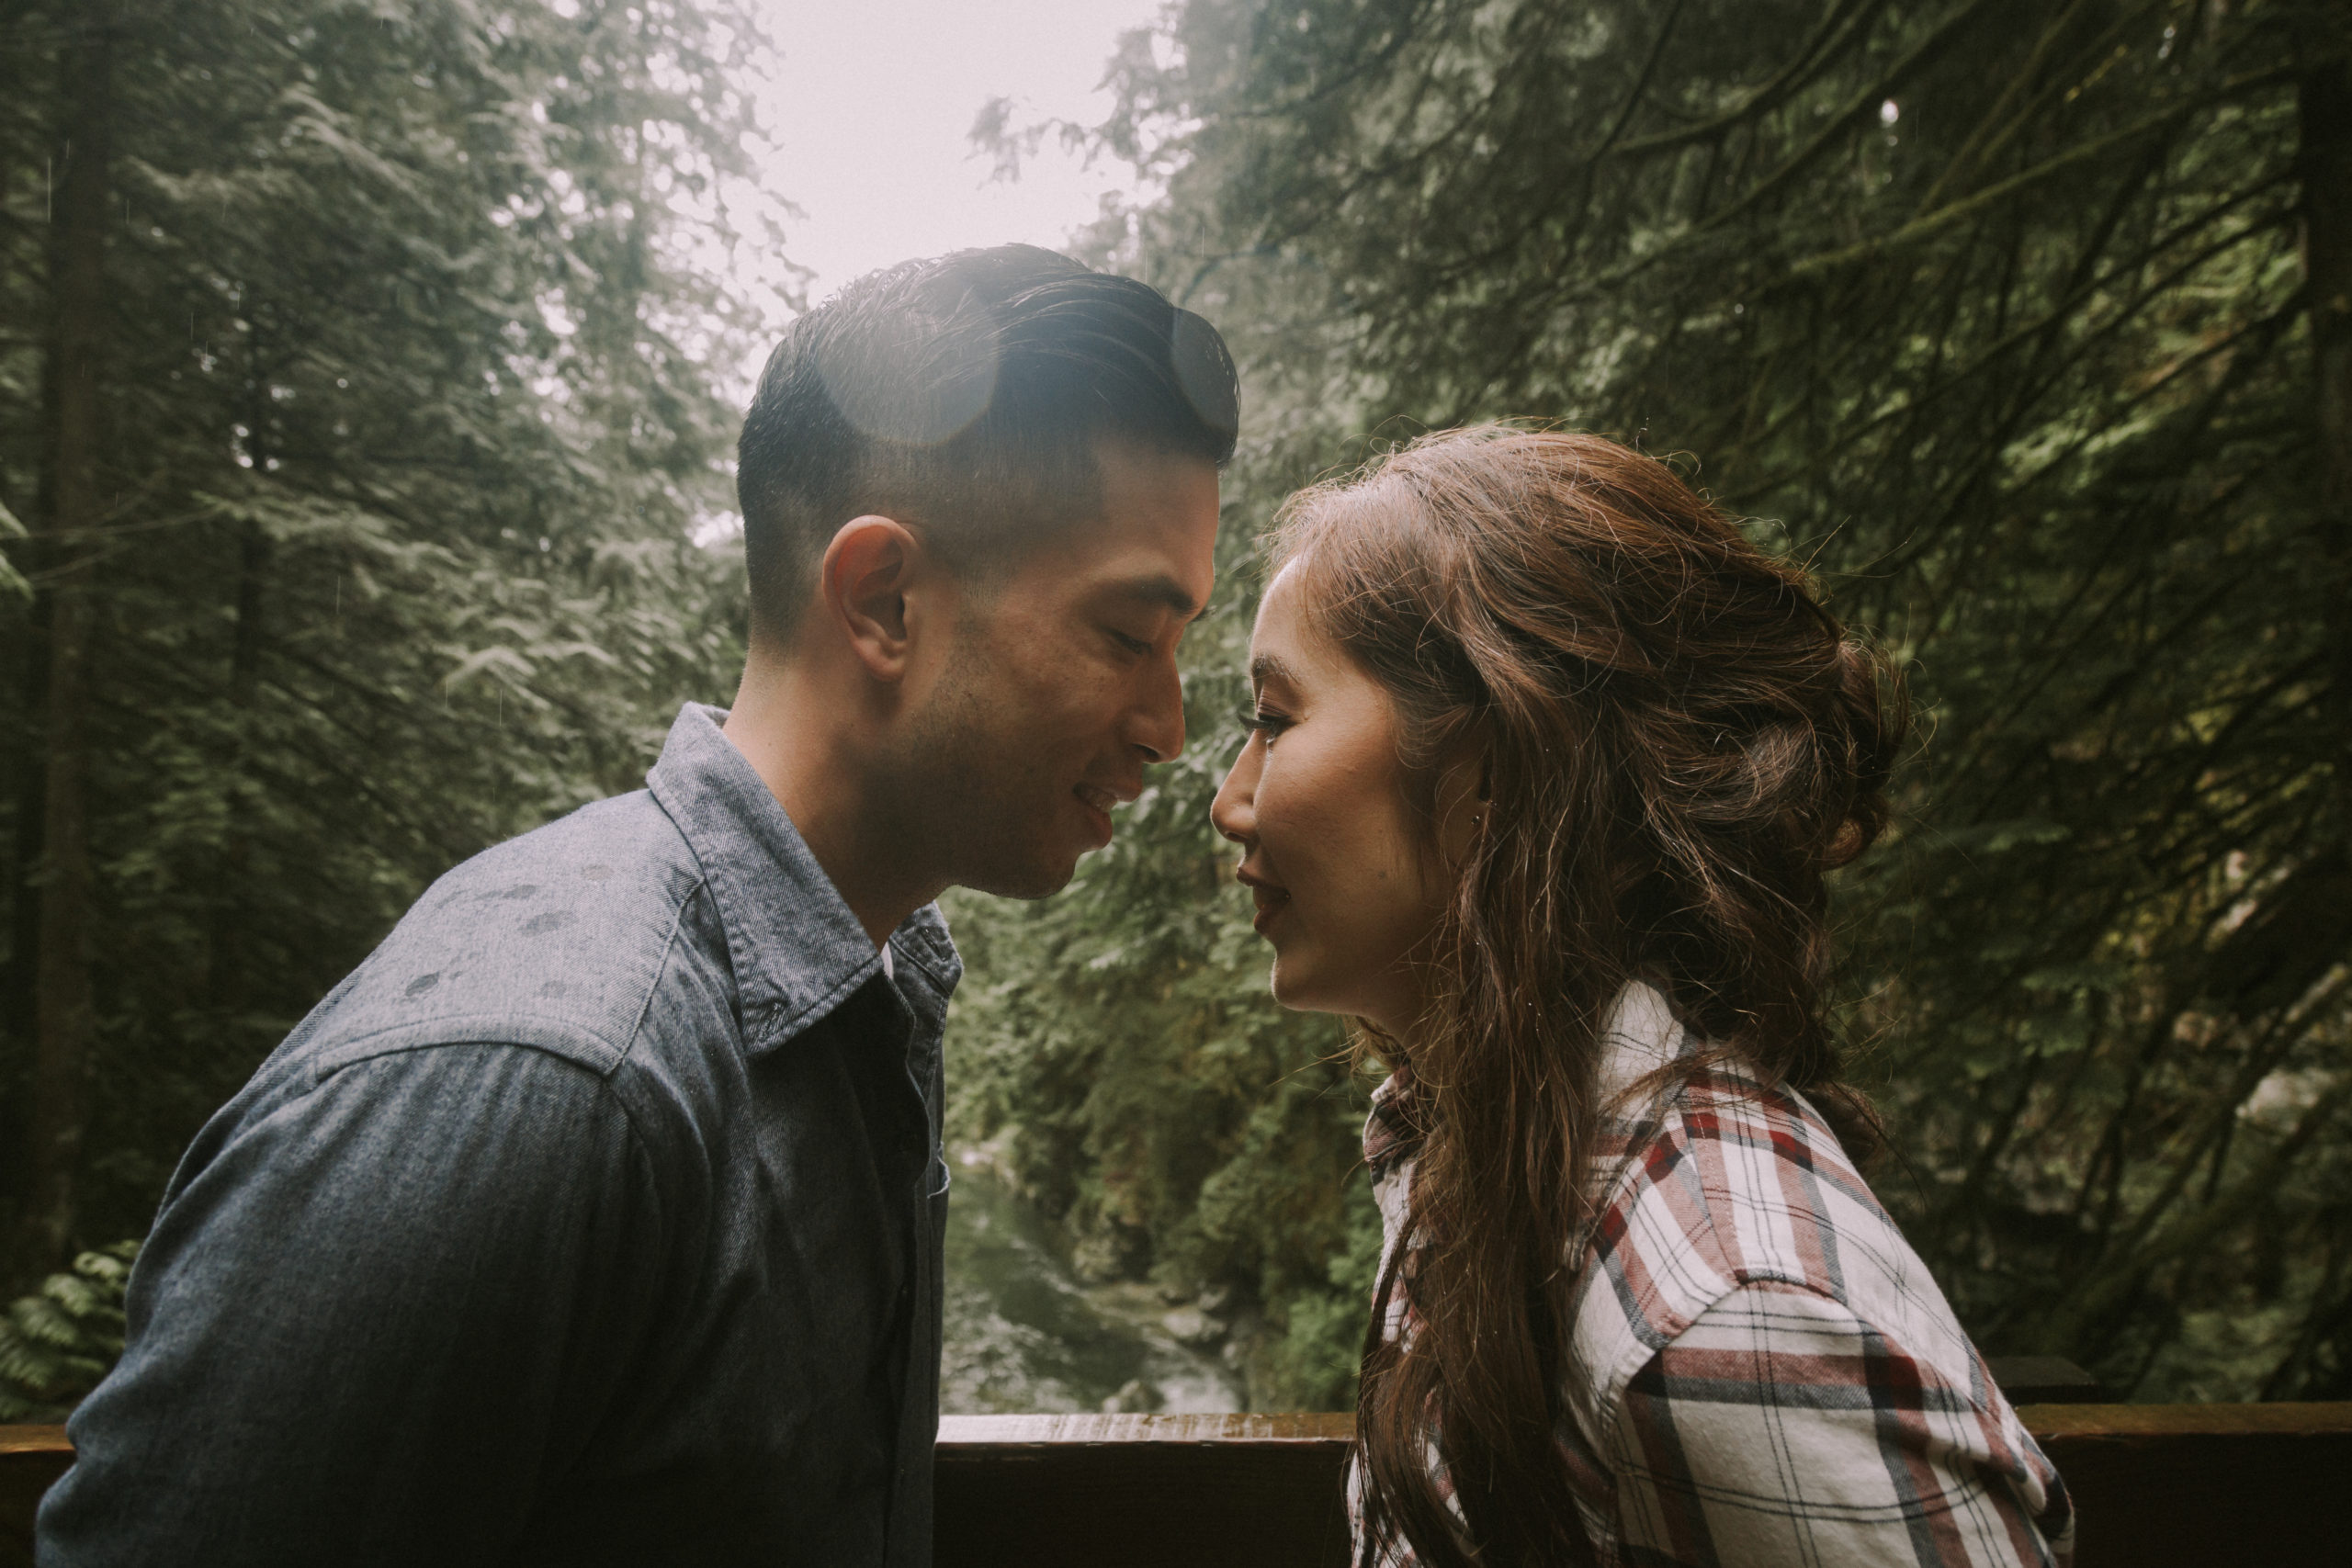 You Definitely Will Want Engagement Photos For These 5 Key Reasons